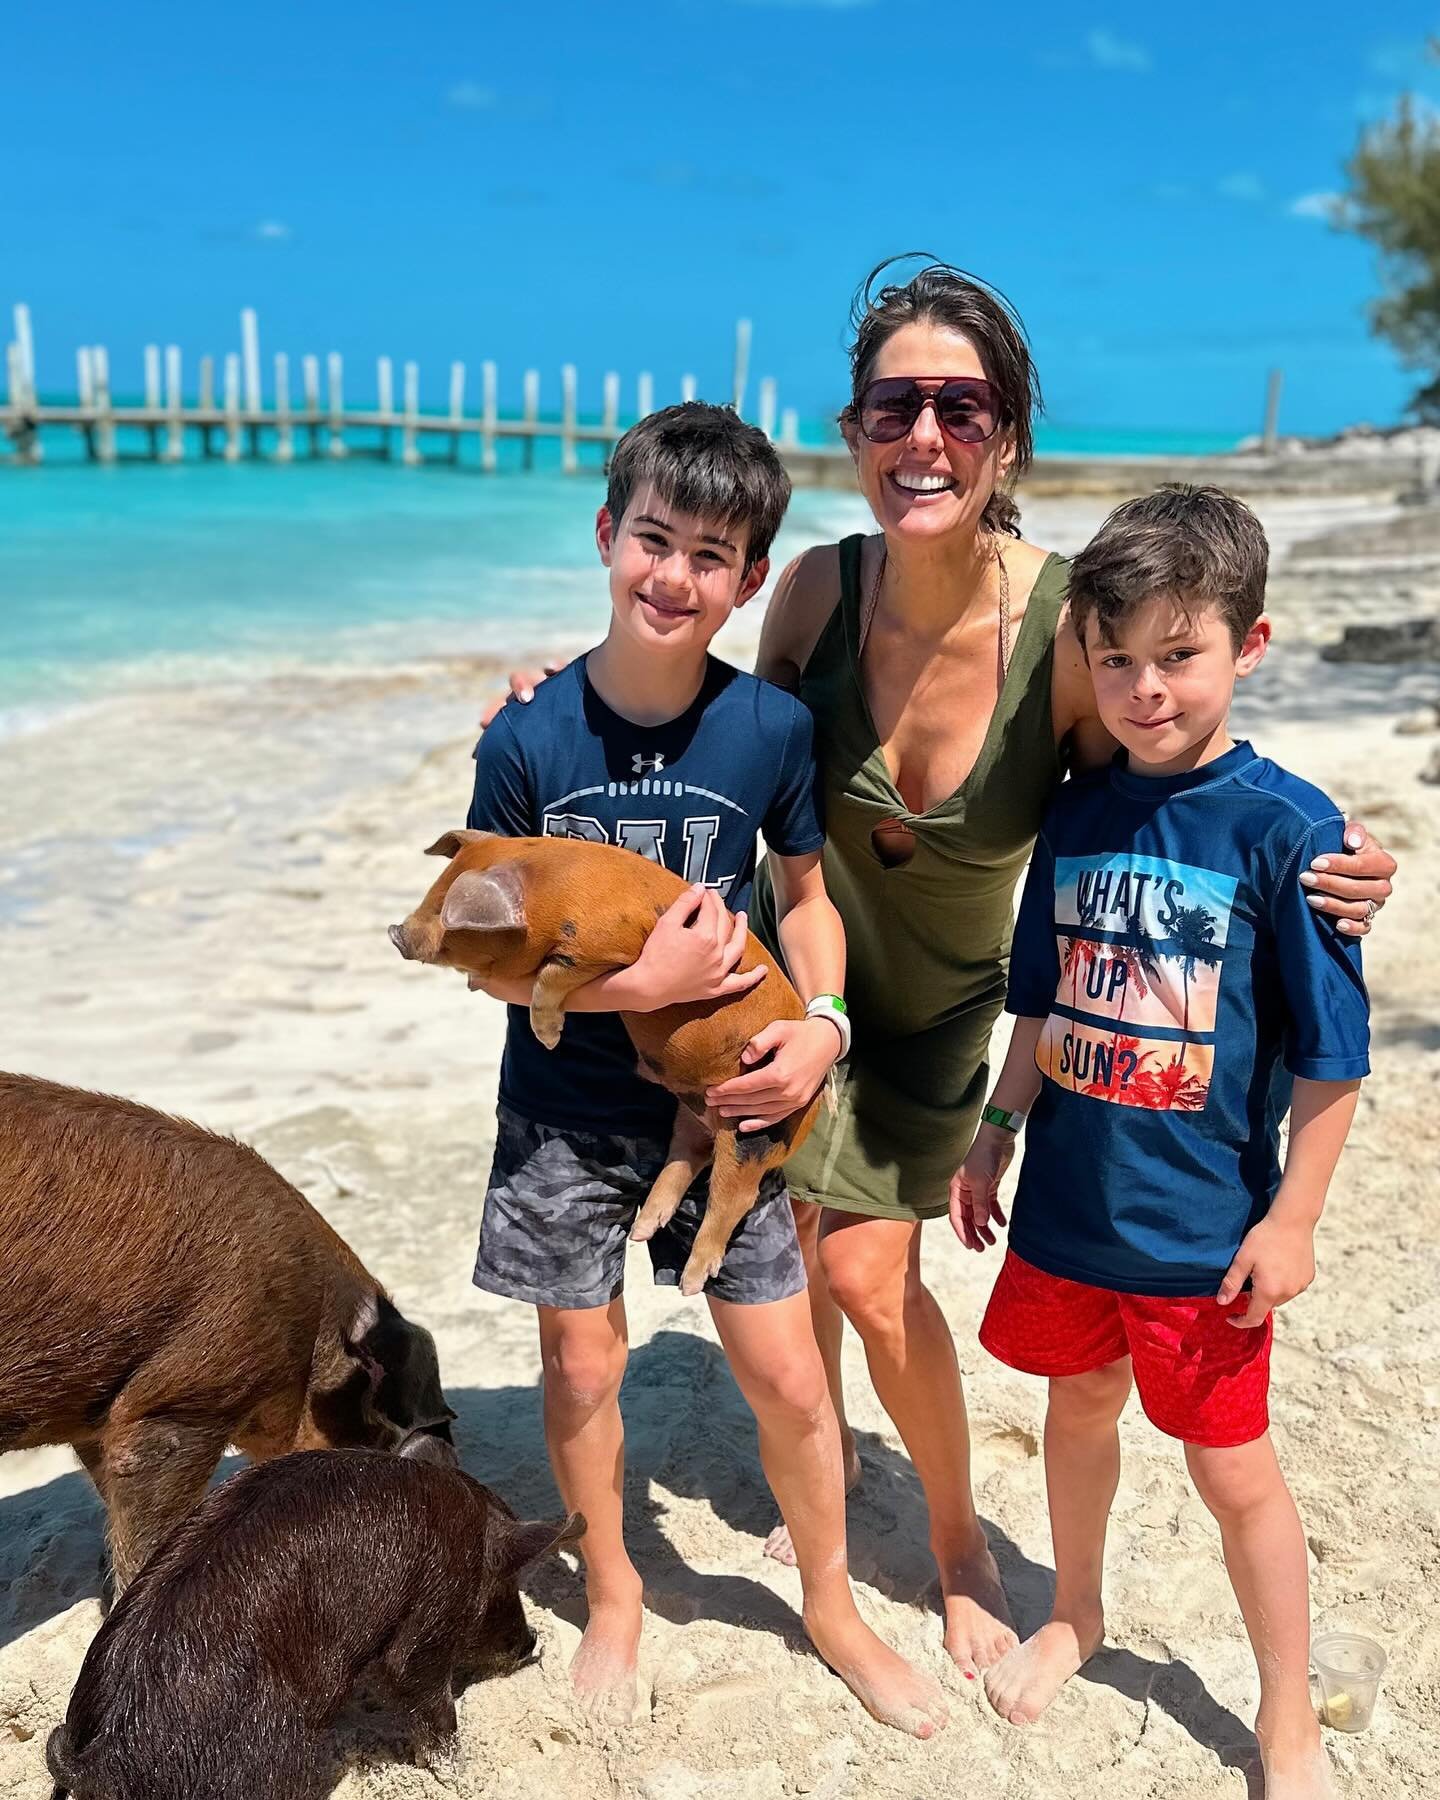 When pigs fly&hellip;or swim! Spent the day island hopping with my cuties and landed on these adorable pigs. The swimming pigs of Rose island are treated like royalty and living their best life 🐷👑 😎 🏝️ 

#roseisland #swimmingpigs #bahamas #lovemy